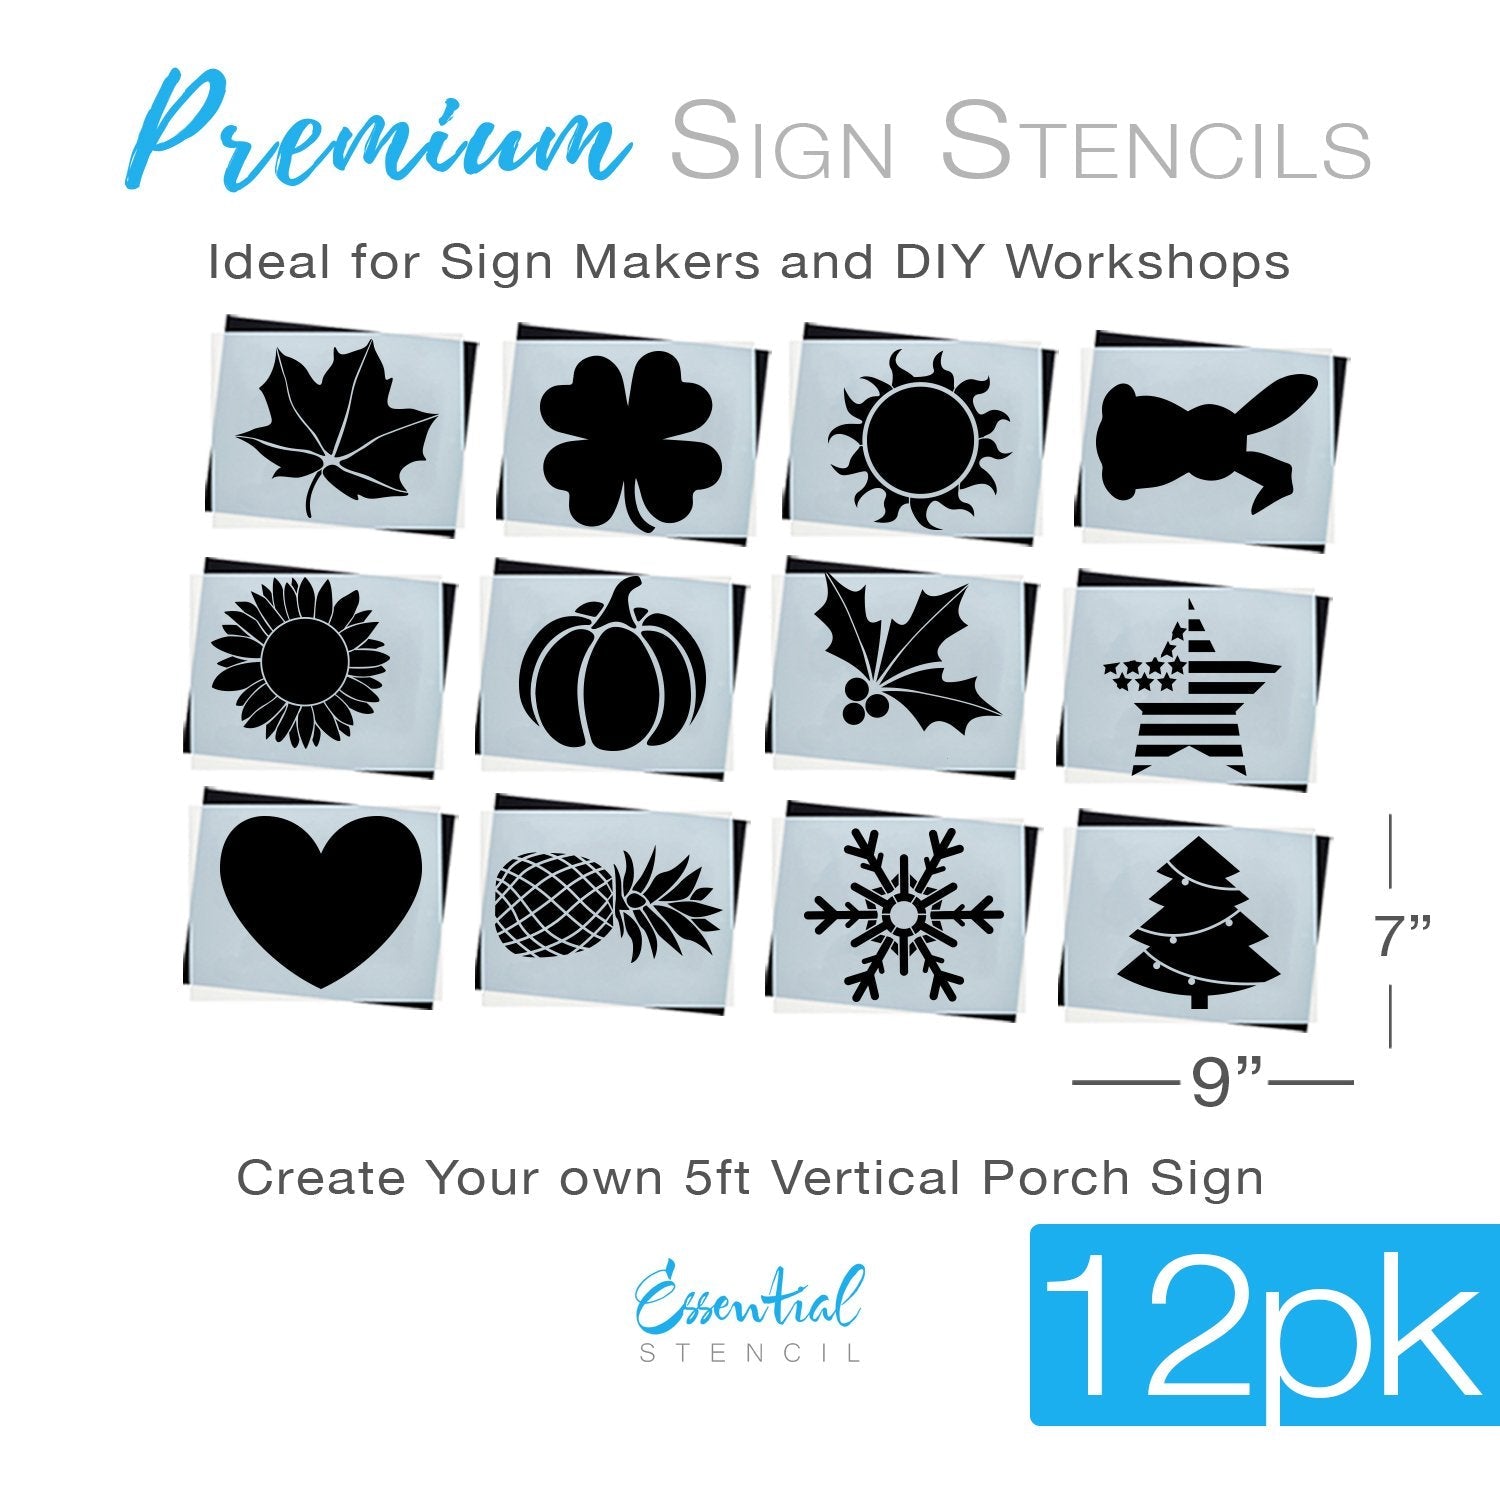 Welcome Stencils for Painting on Wood Reusable Seasonal Kit, 26pcs/Set  Stencil Stuff, Large Home Stencil, Halloween, Christmas, Large Letter  Stencils for Crafts, American Flag, Autumn Stencils